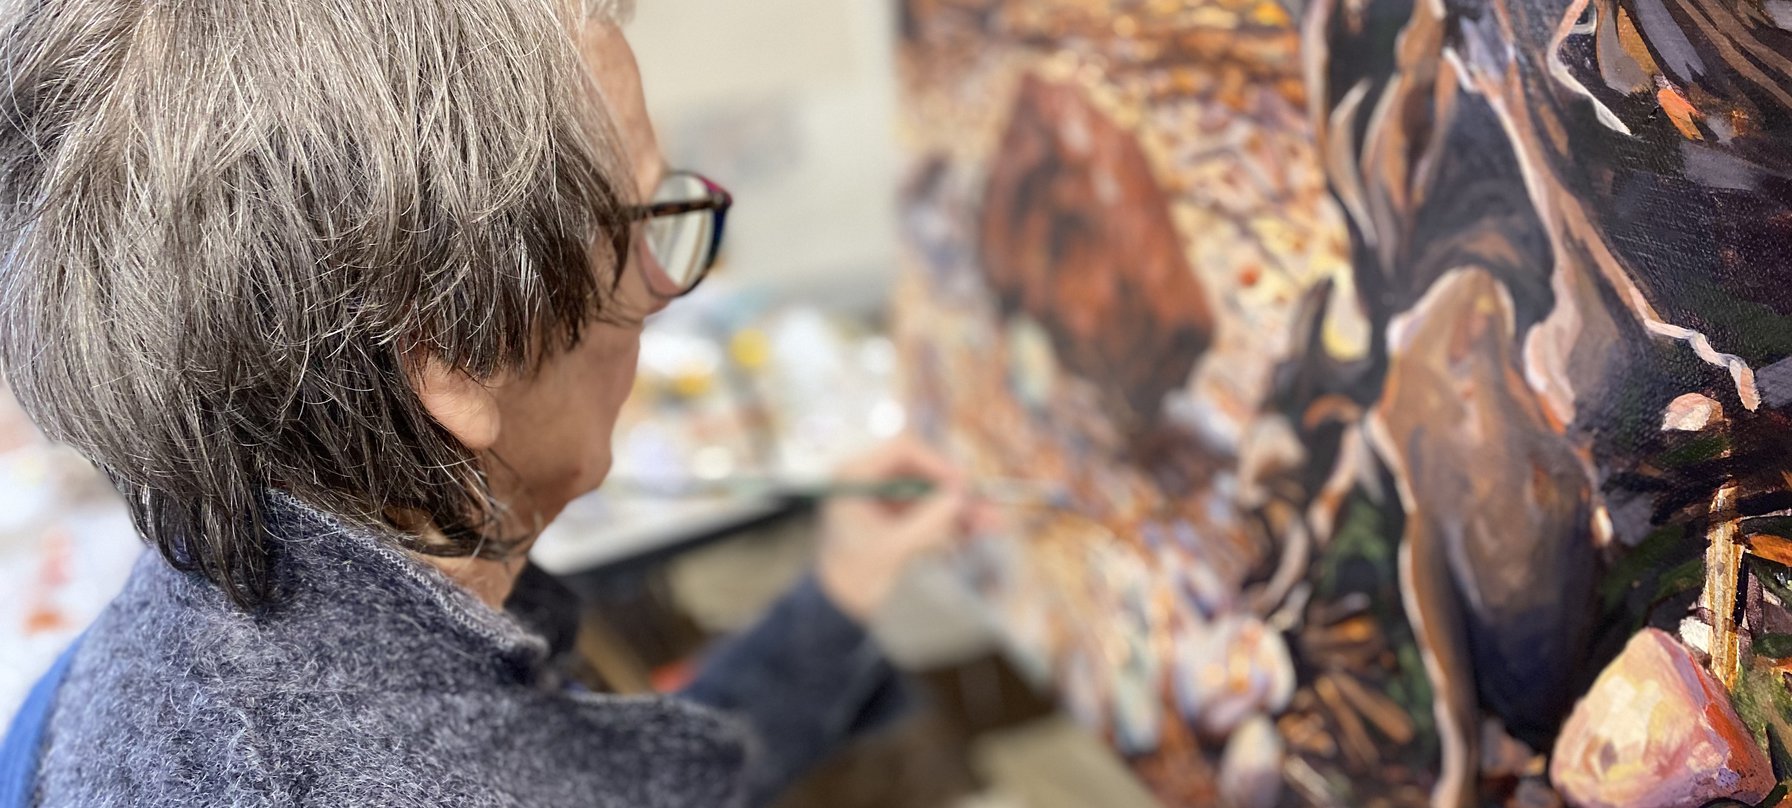 A photo of Helena Demczuk painting. The emerging painting features natural colours of browns, yellows, oranges and reds, creating geological-looking shapes. Credit Helena Demczuk.